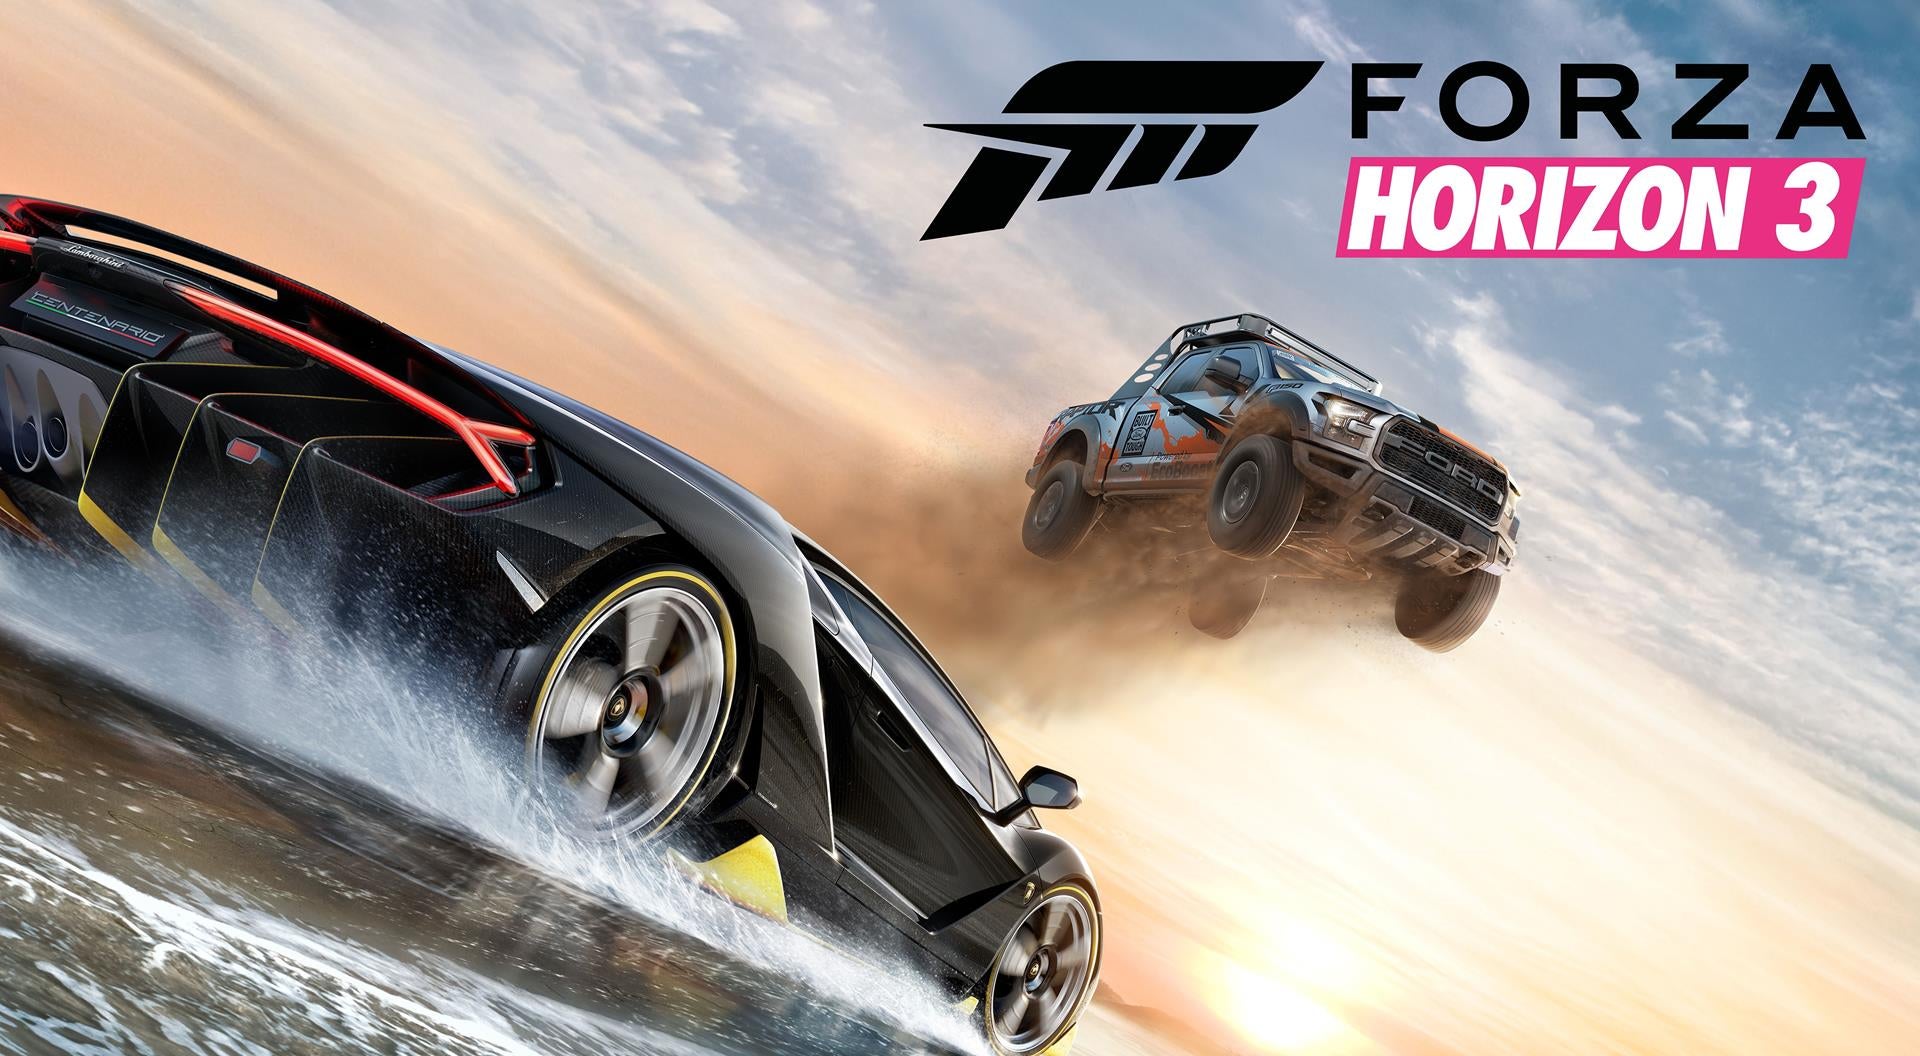 Image for Running Forza Horizon 3 at 1080p/60 on PC without stuttering is a challenge for most systems - report